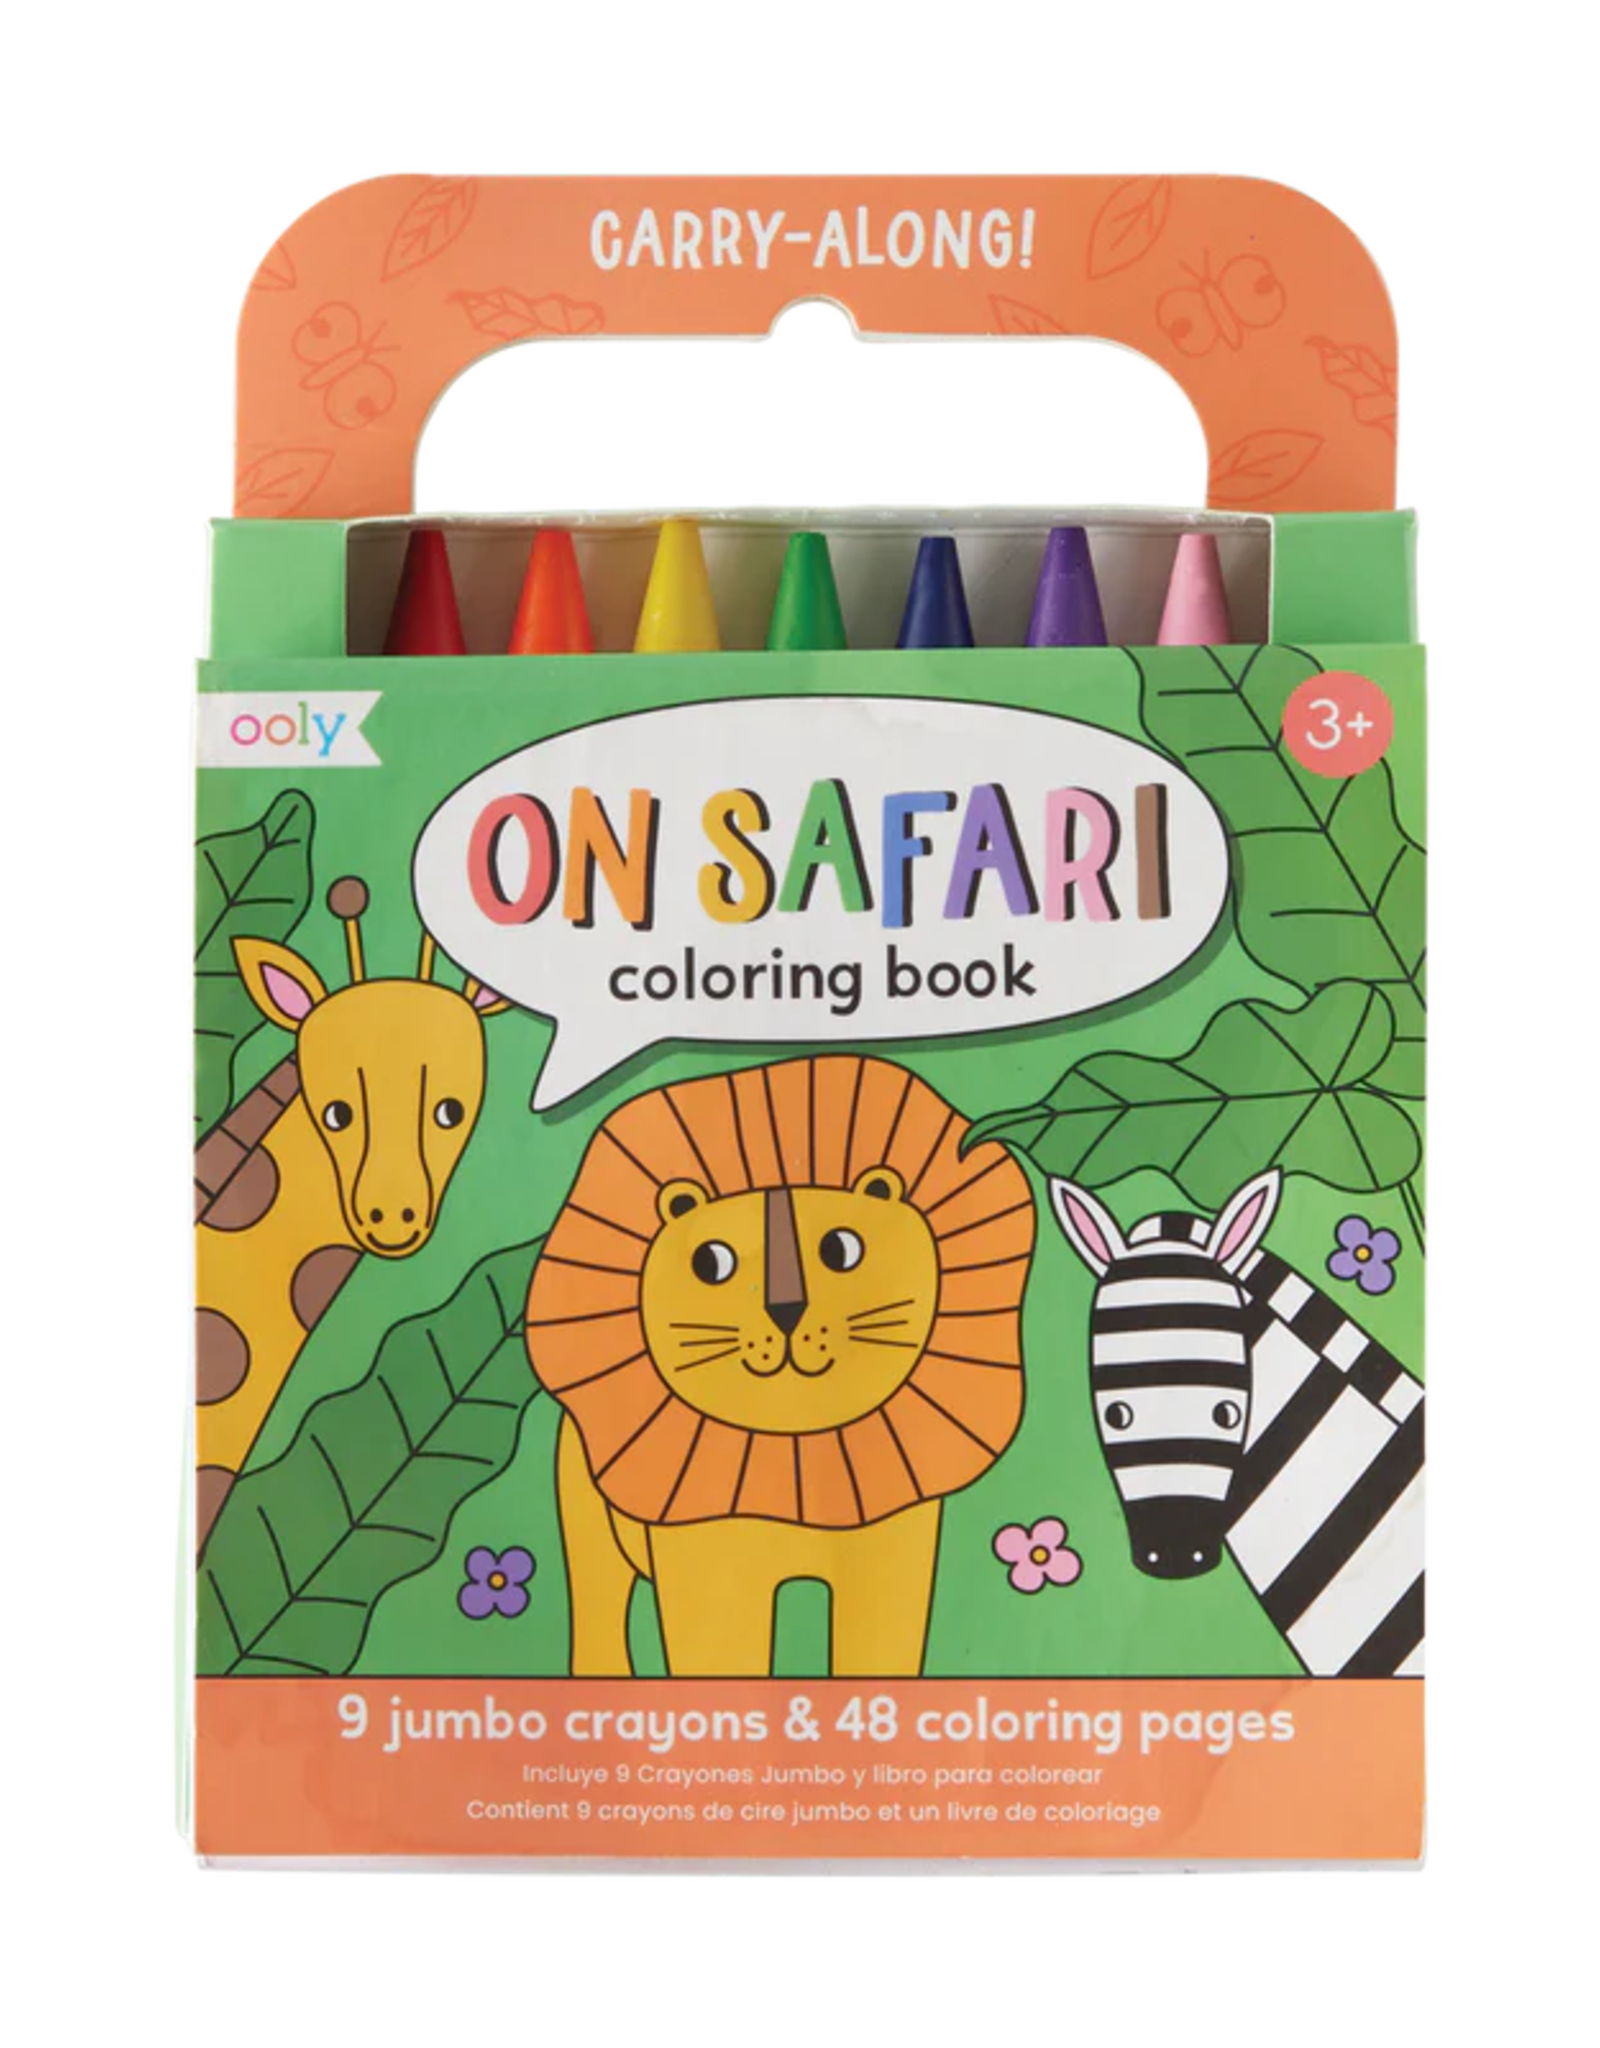 Ooly Carry Along Coloring Book - On Safari